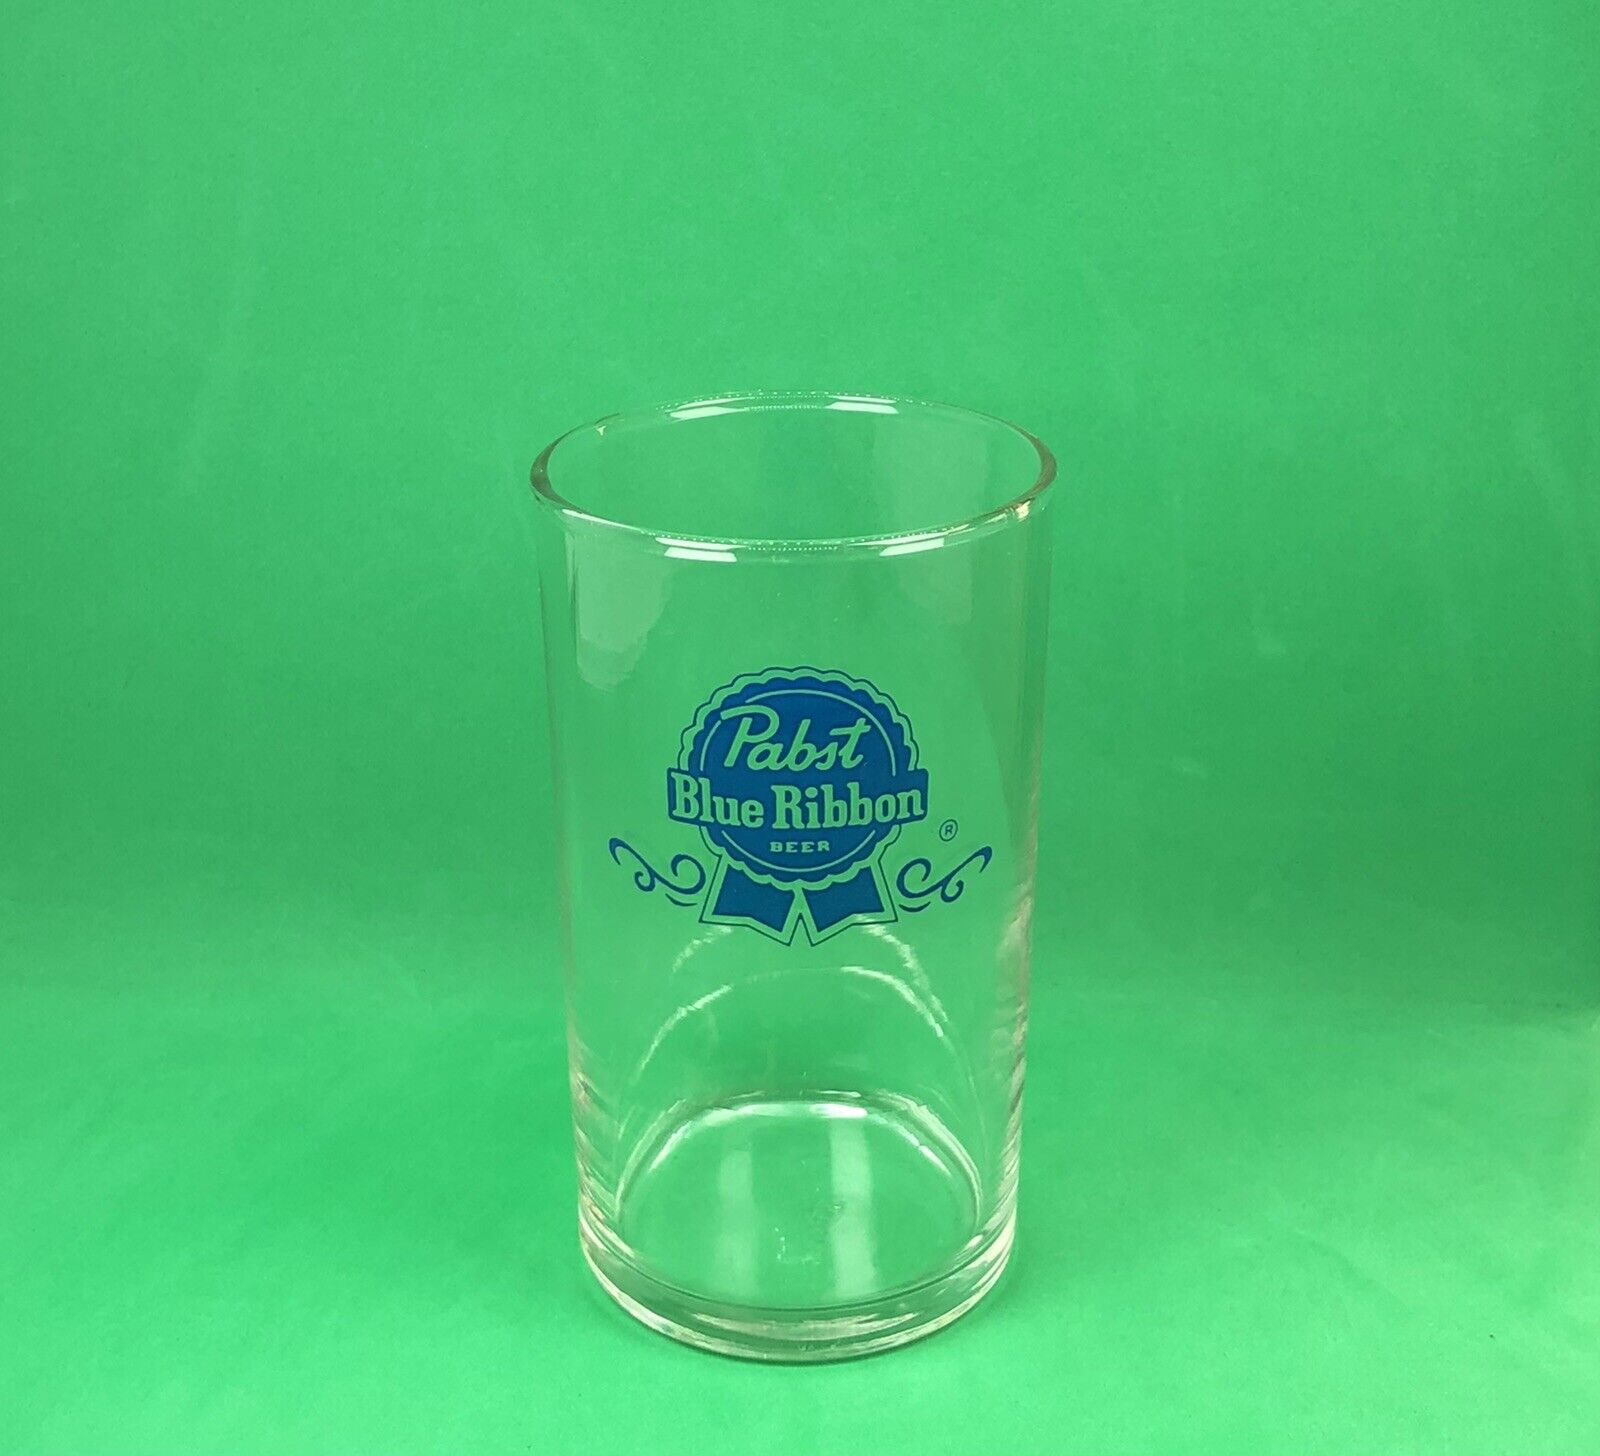 Pabst Blue Ribbon Glass / Vintage Tavern Advertising / Home Barware / Clearance